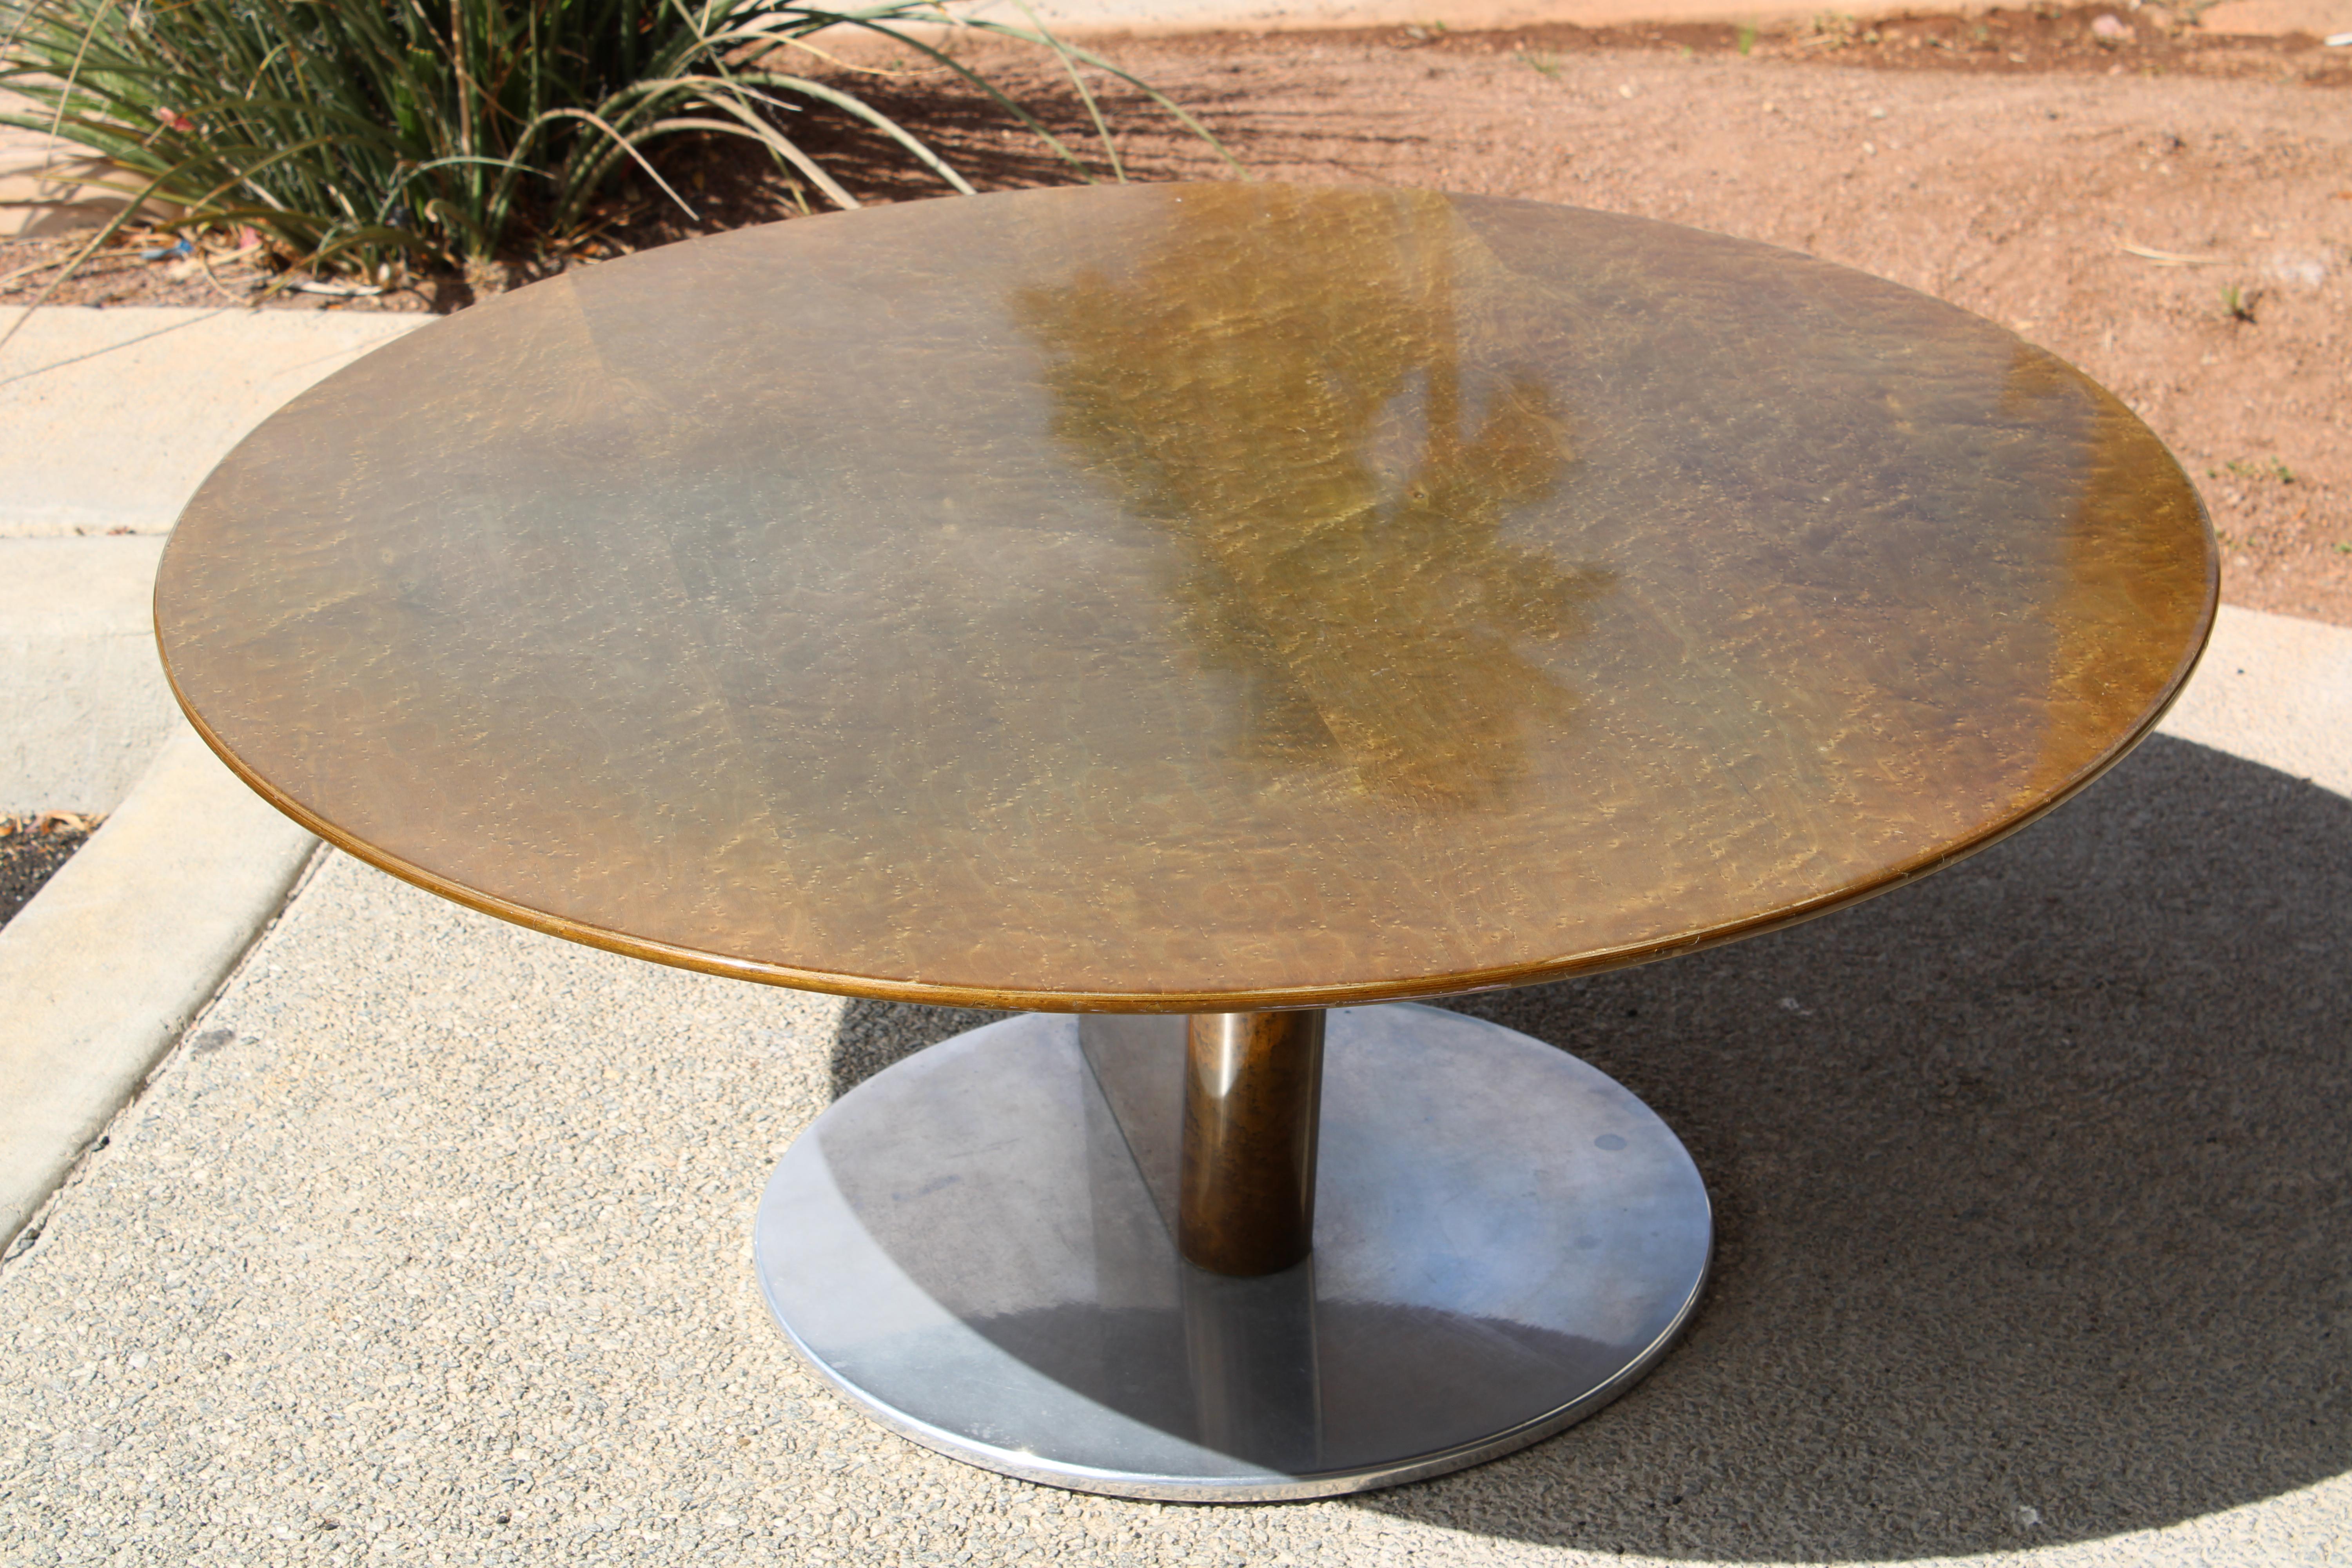 Italian coffee table with lacquered birdseye maple designed by Saporiti in the 1980's. Table is set above a circular aluminum base. We had the table top professionally lightly refinished to remove the scratches from years of use. Table measures